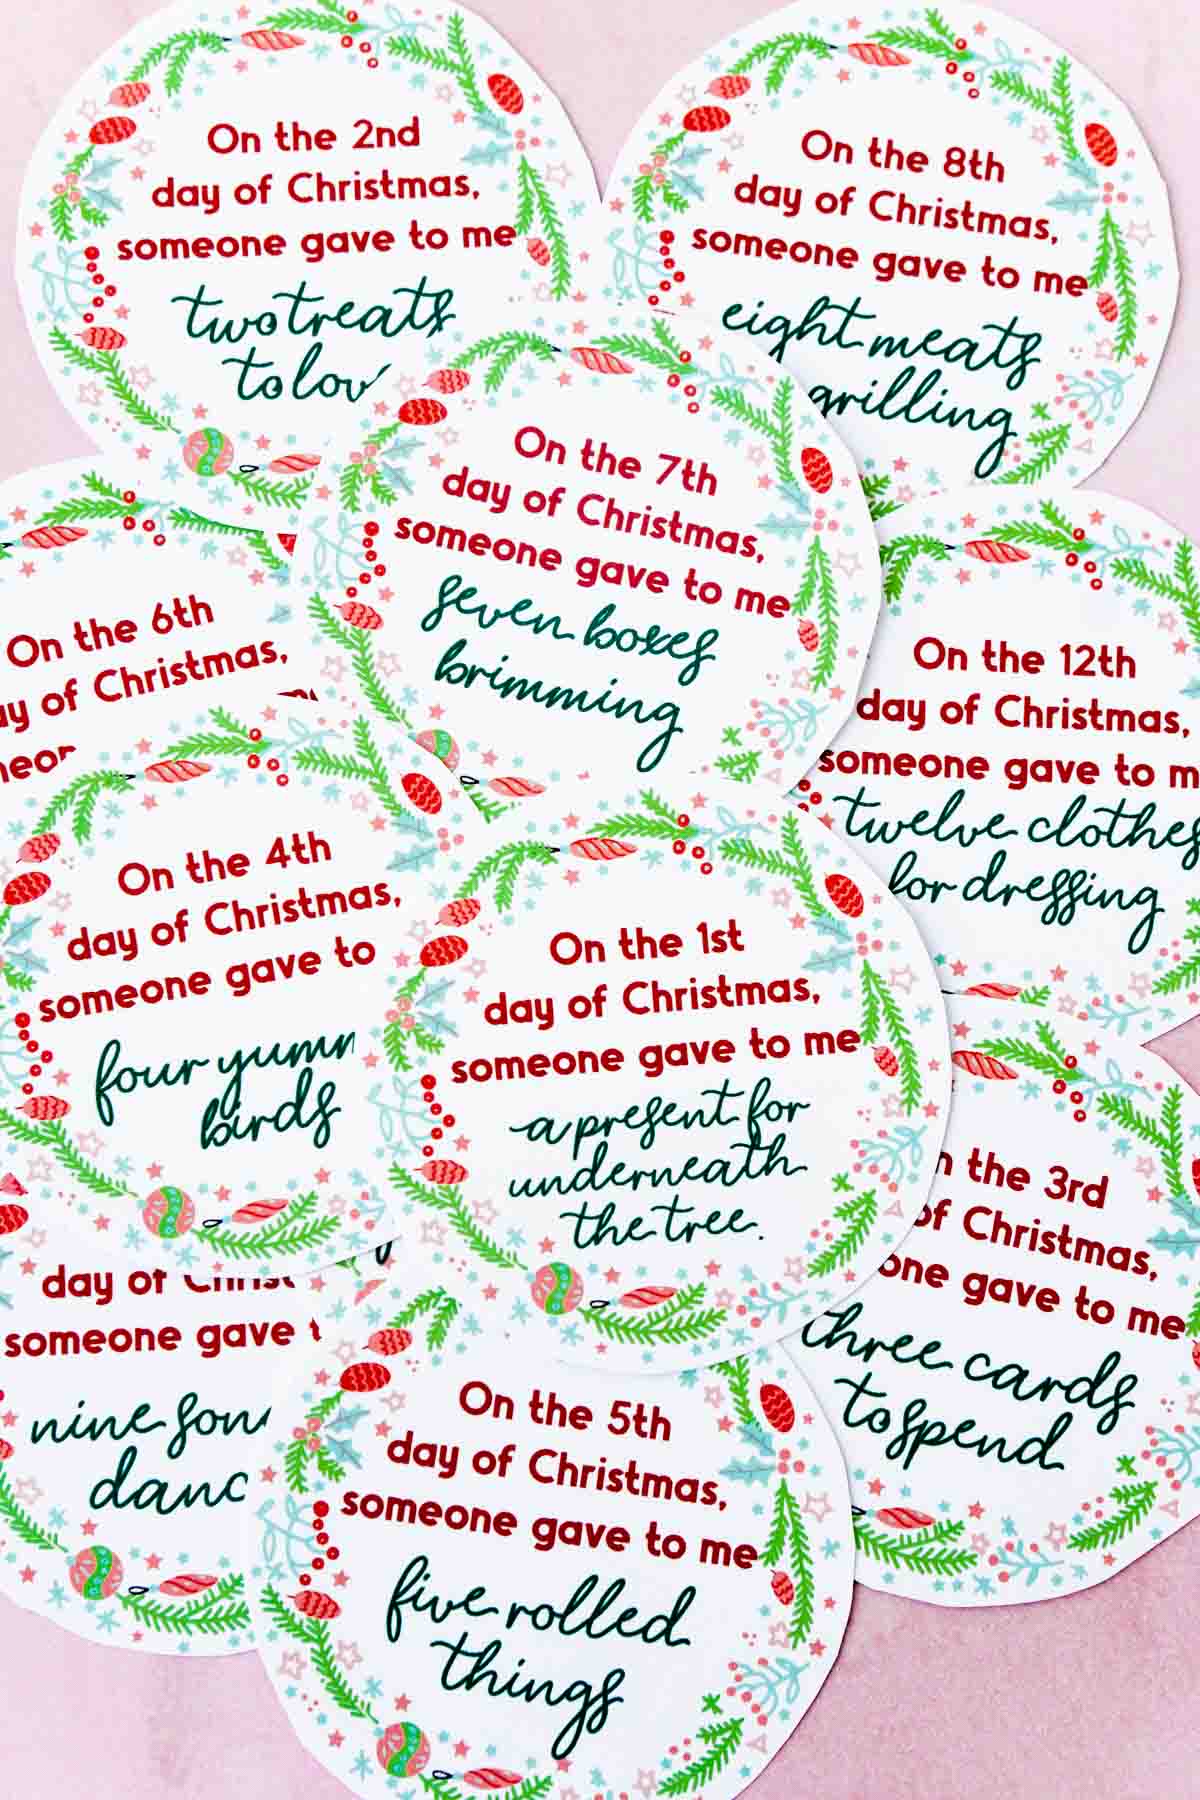 creative 12 days of christmas gifts free gift tags play party plan